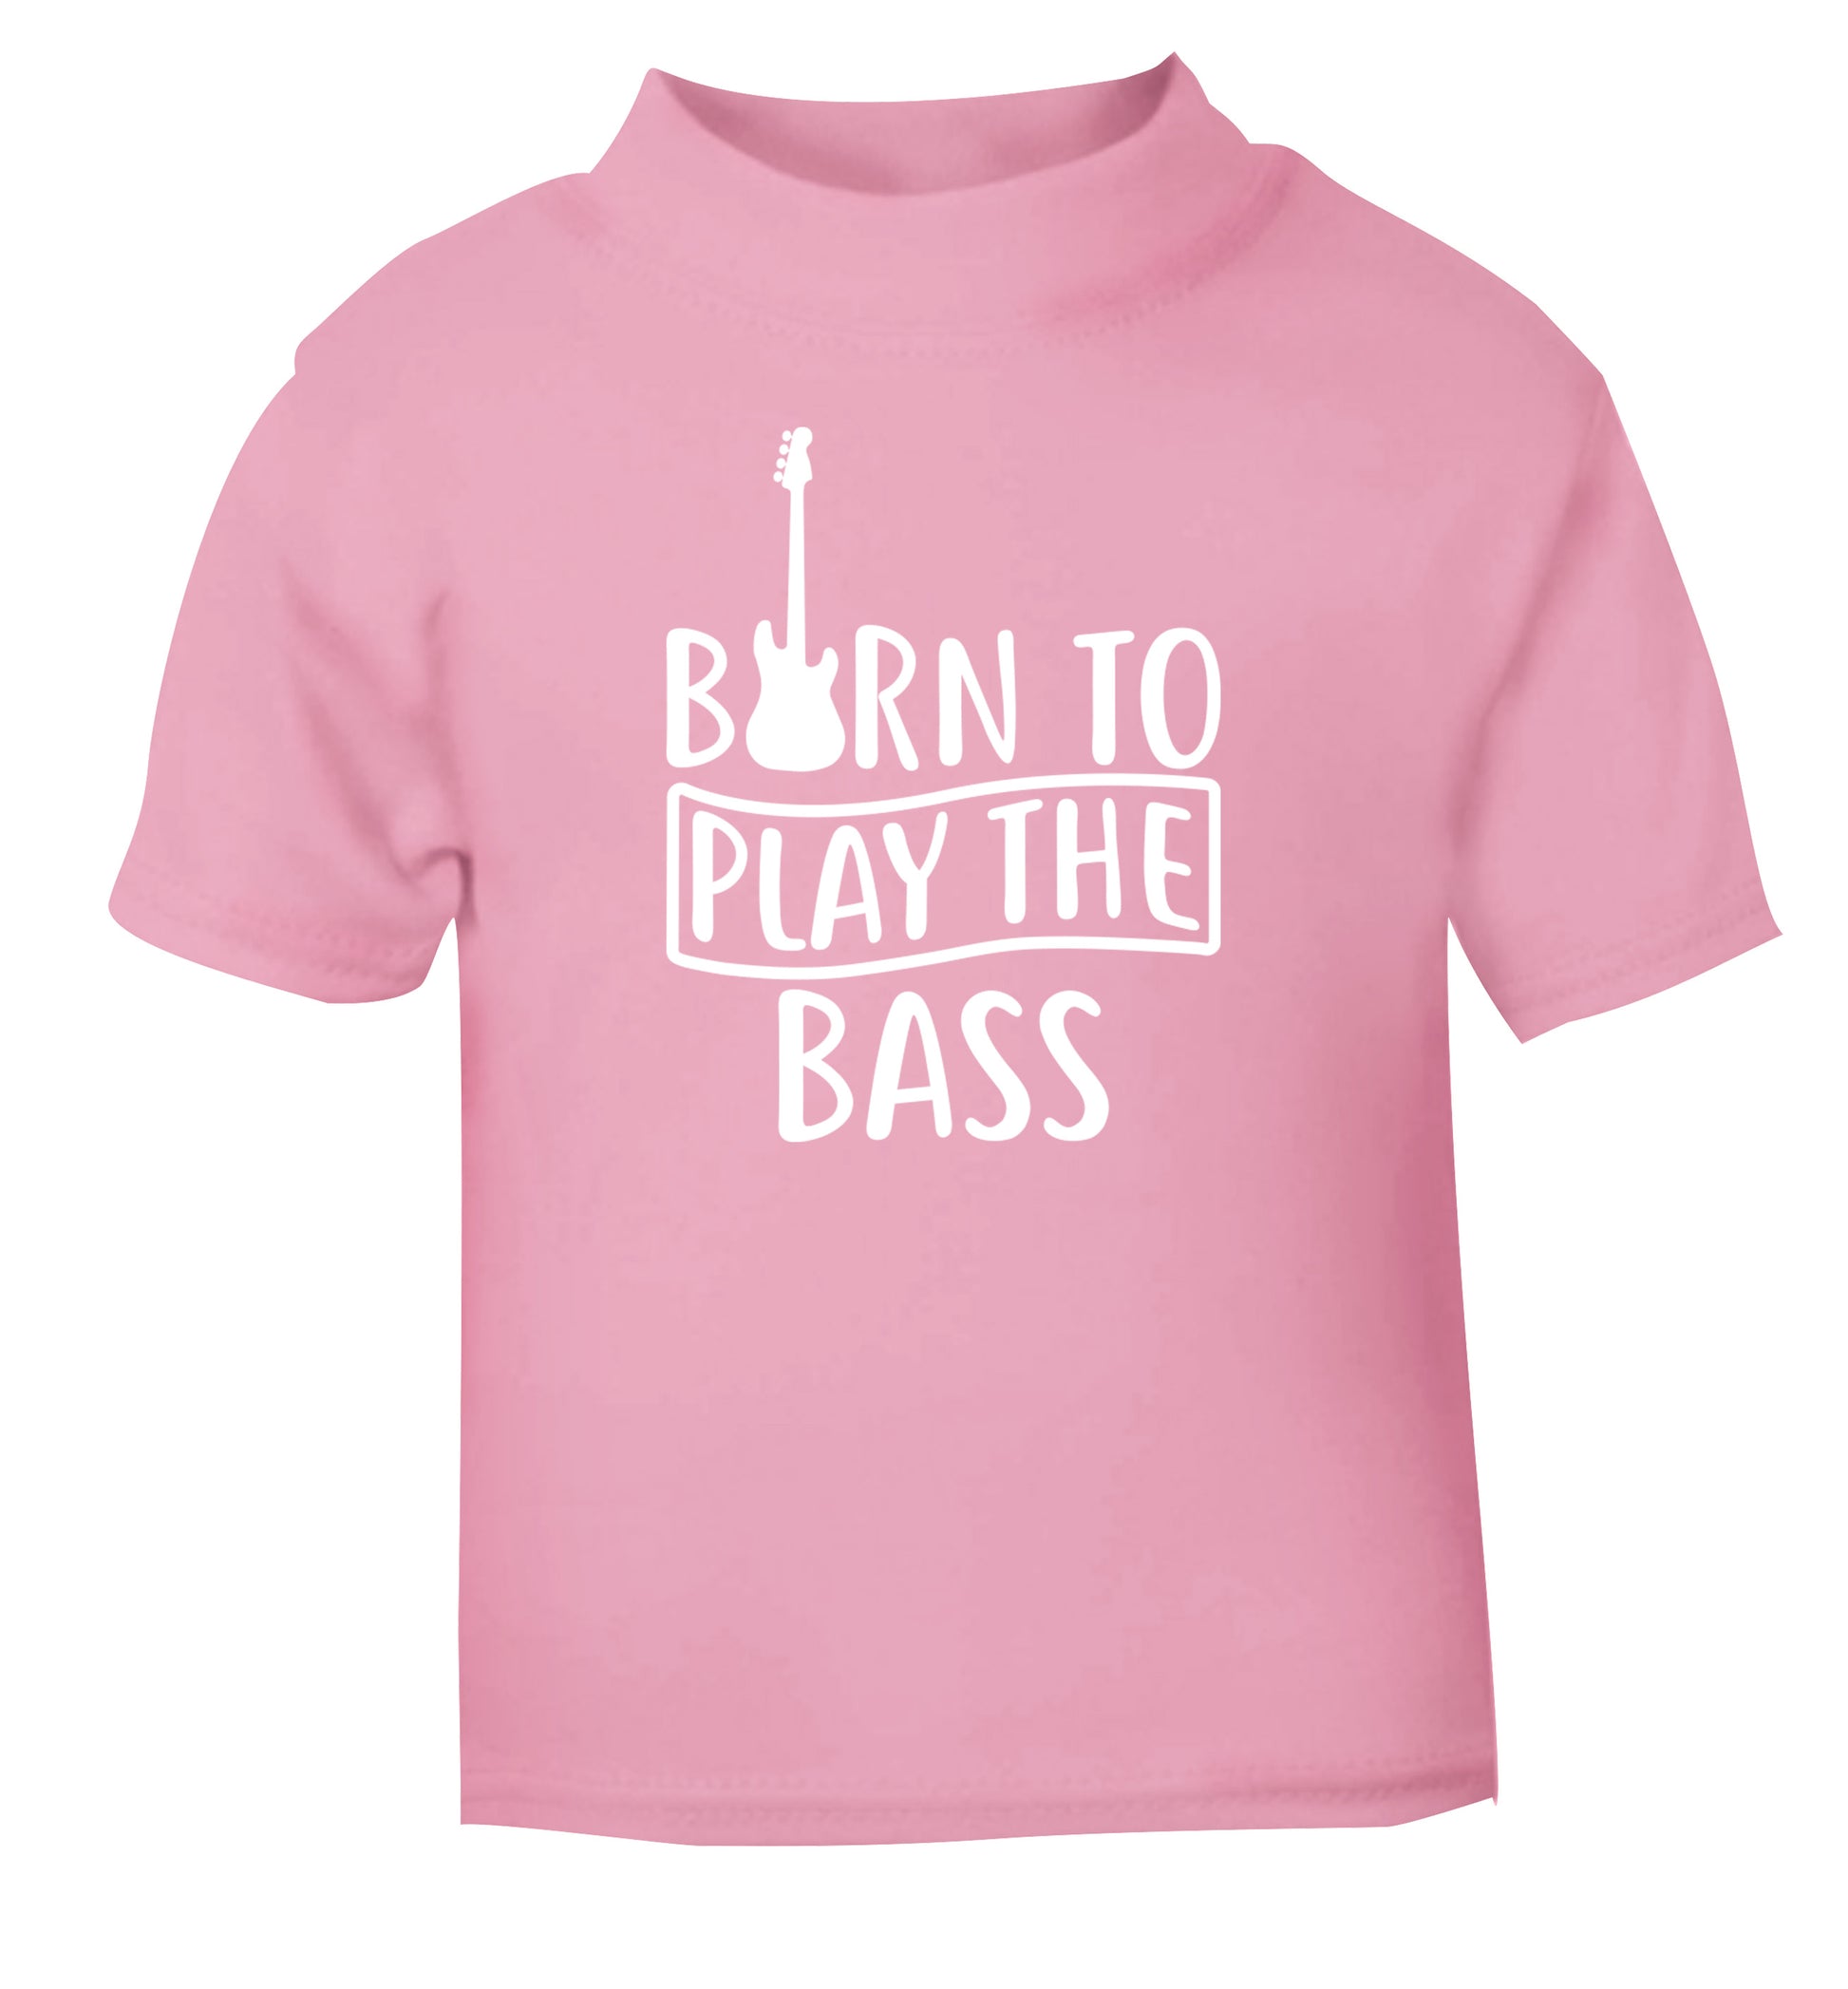 Born to play the bass light pink Baby Toddler Tshirt 2 Years